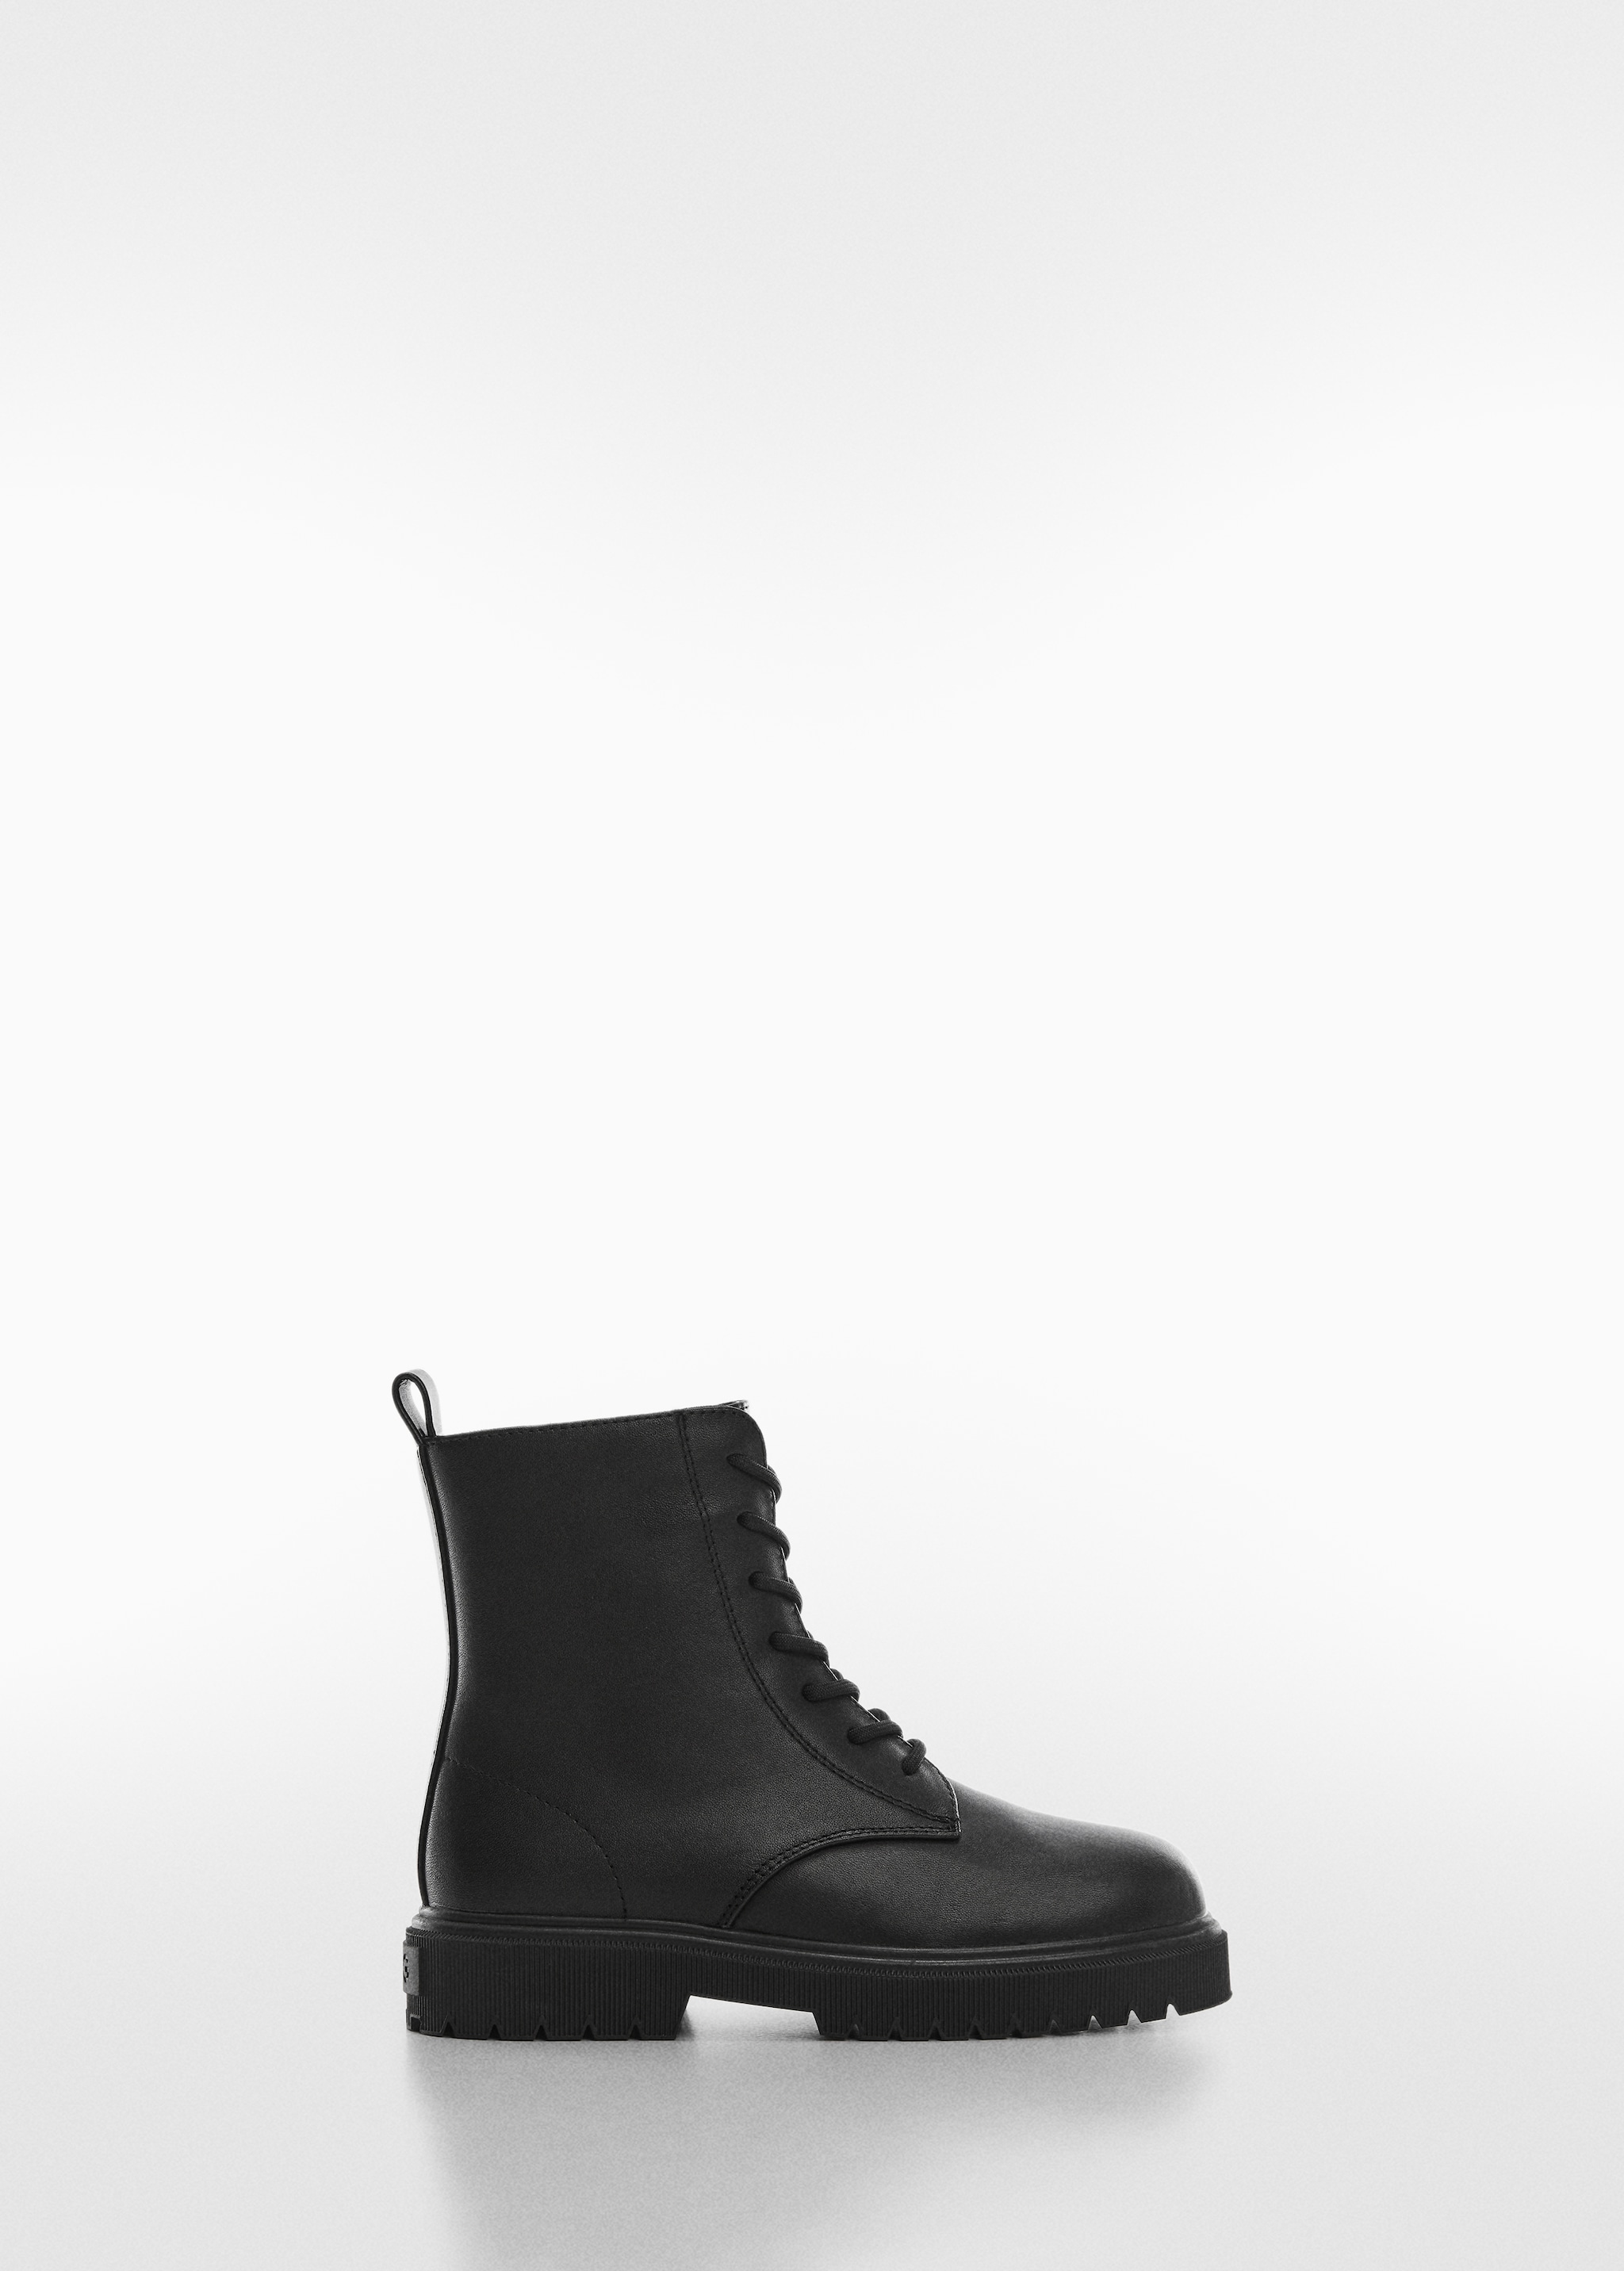 Lace-up leather boots - Article without model